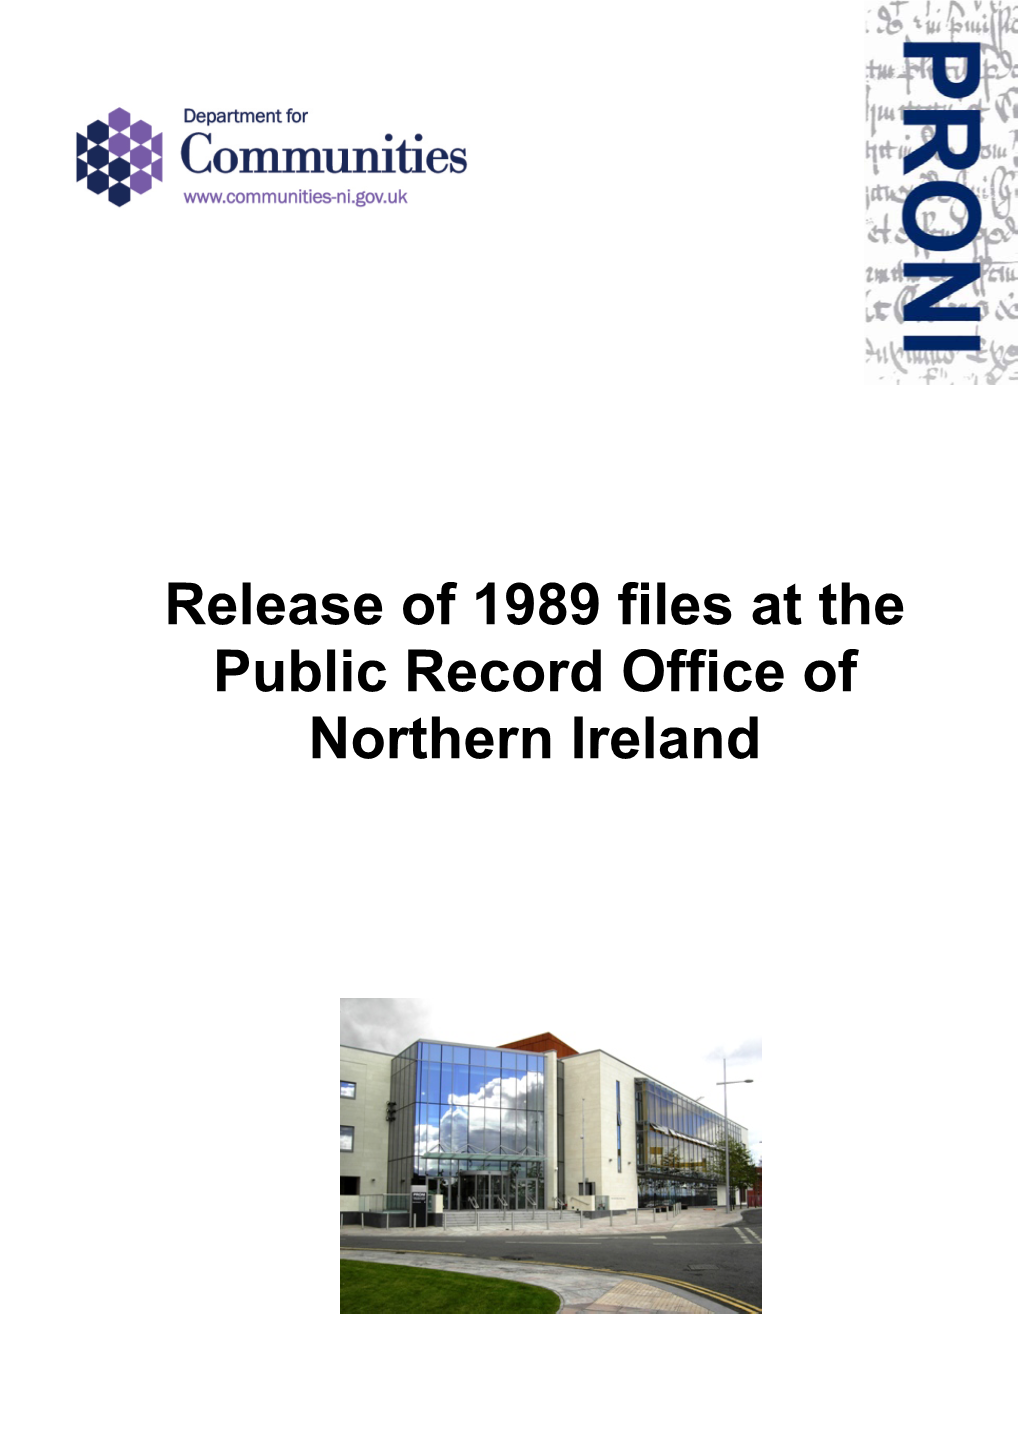 Release of 1989 Files at the Public Record Office of Northern Ireland